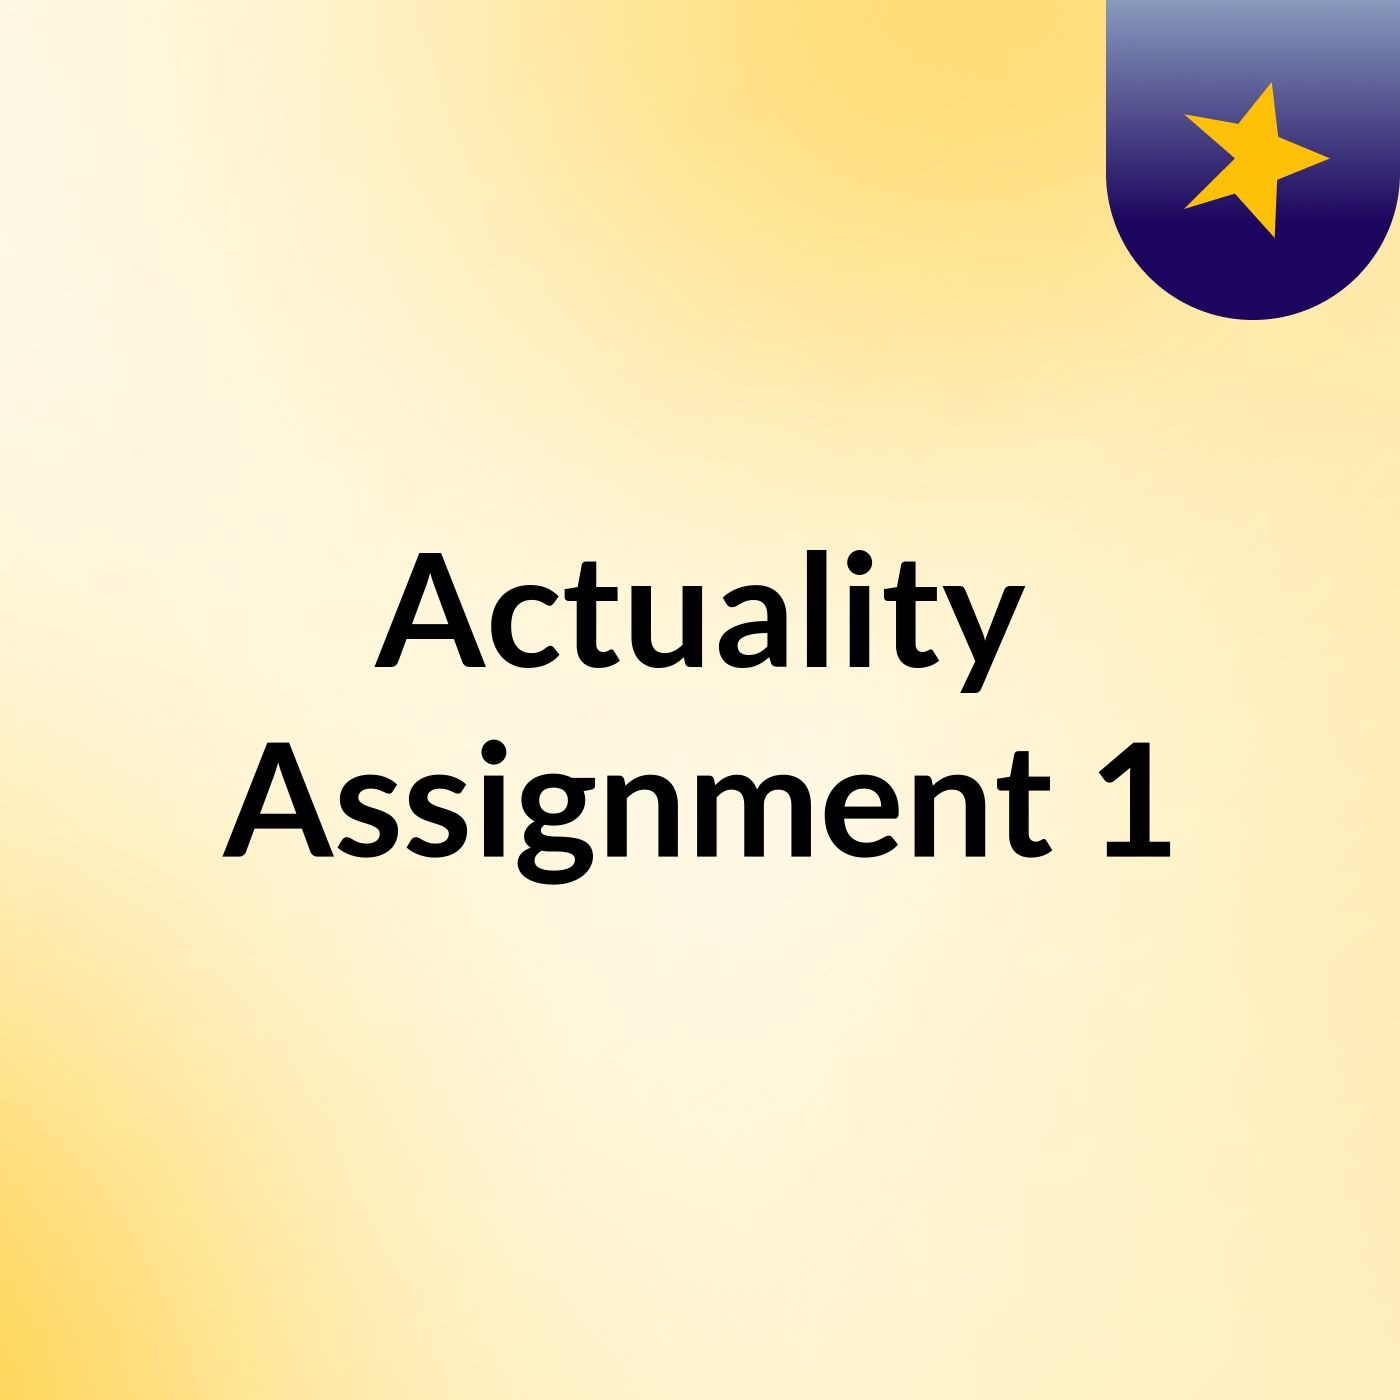 Episode 27 - Actuality Assignment 1